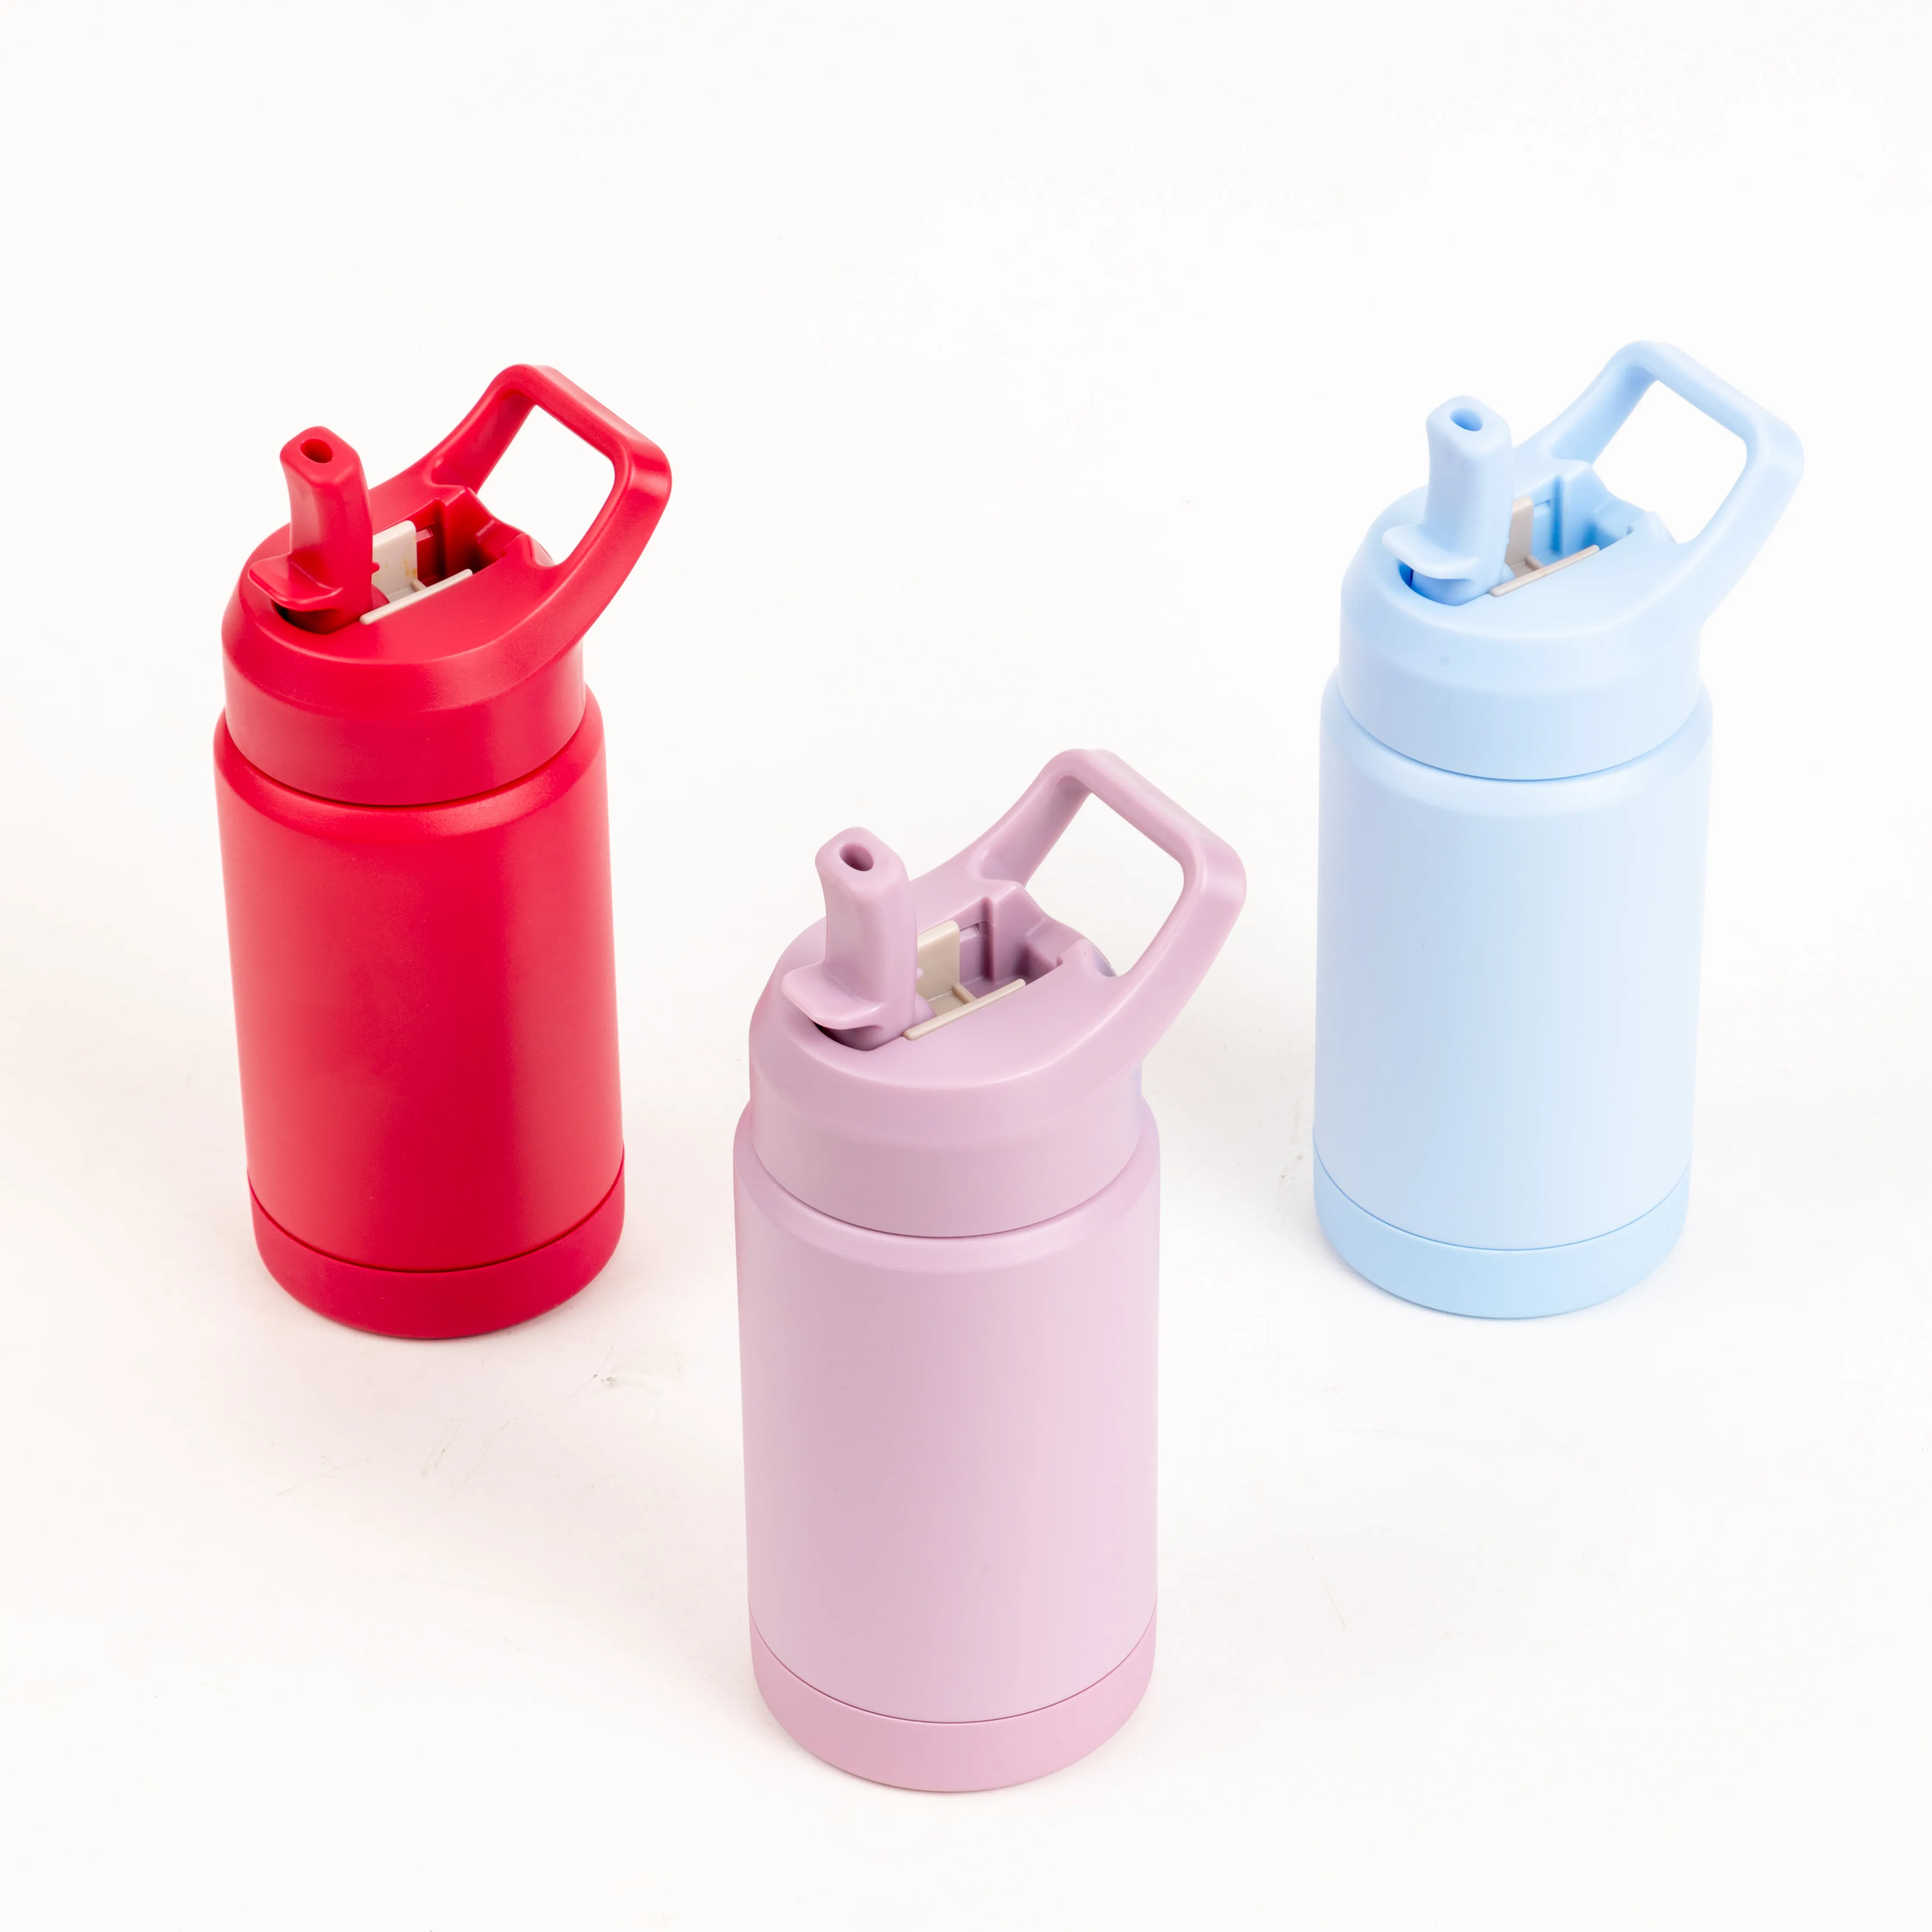 Recycled Materials Stainless Steel 14OZ Sport Bottle kids Drink Bottle Water Bottles With Removeable Straw lid